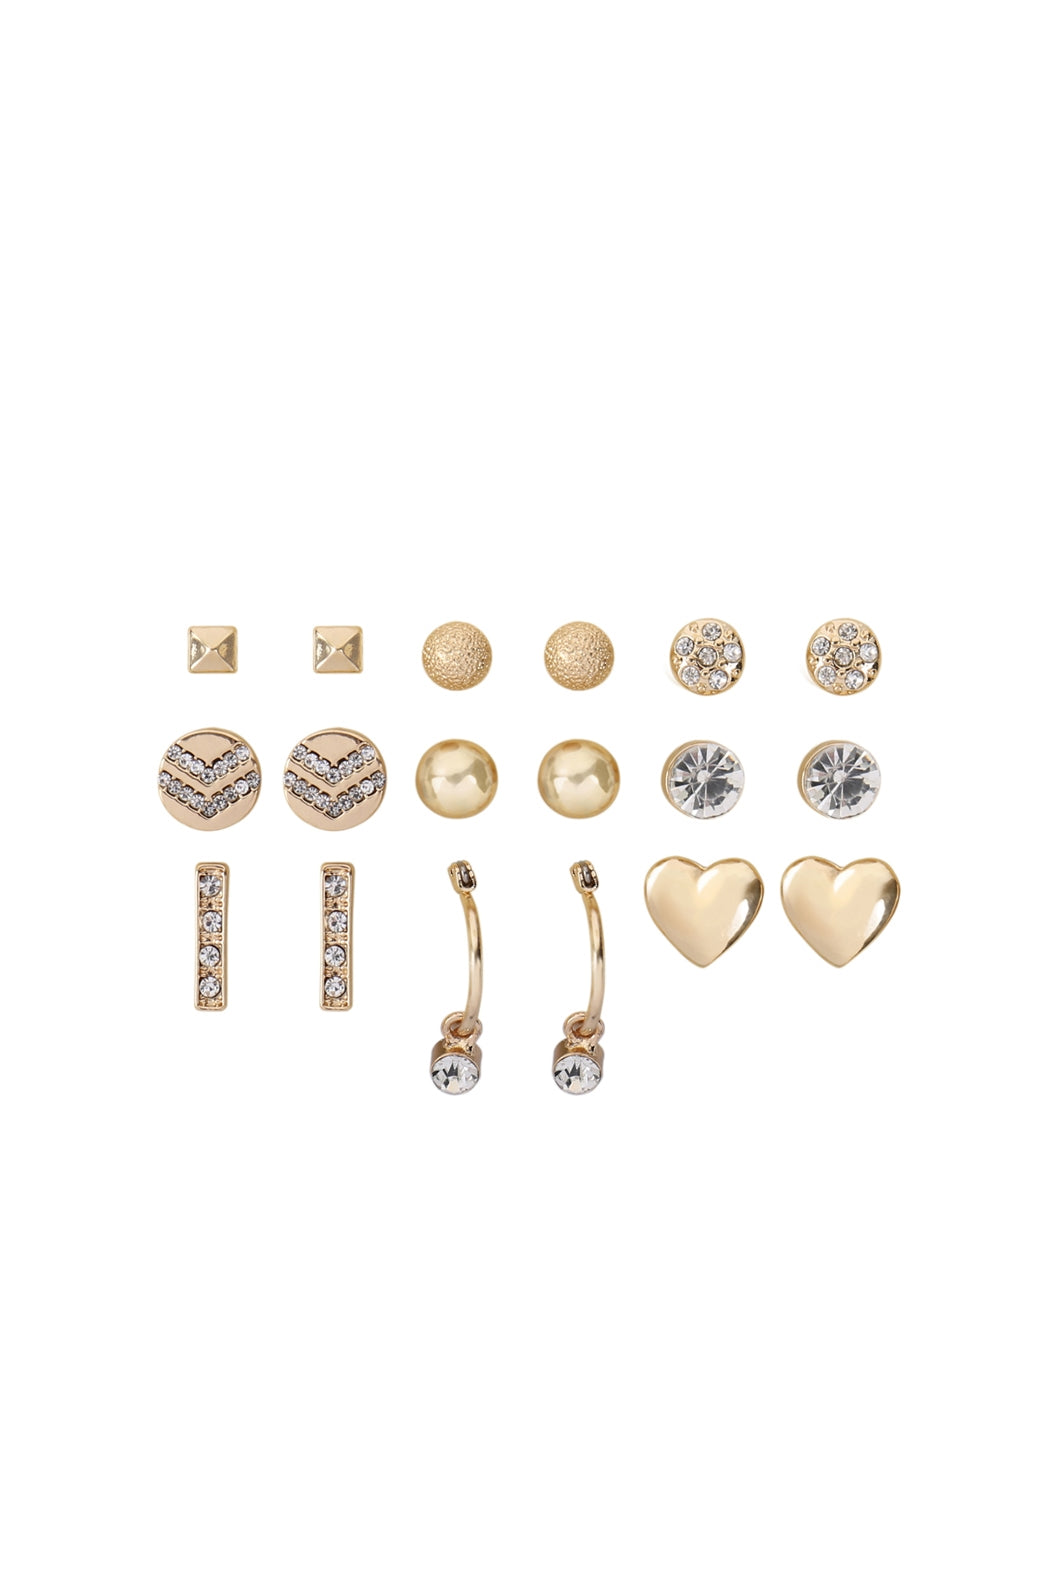 PAIRS ASSORTED HEART ROUND DAINTY EARRINGS (NOW $1.25 ONLY!)